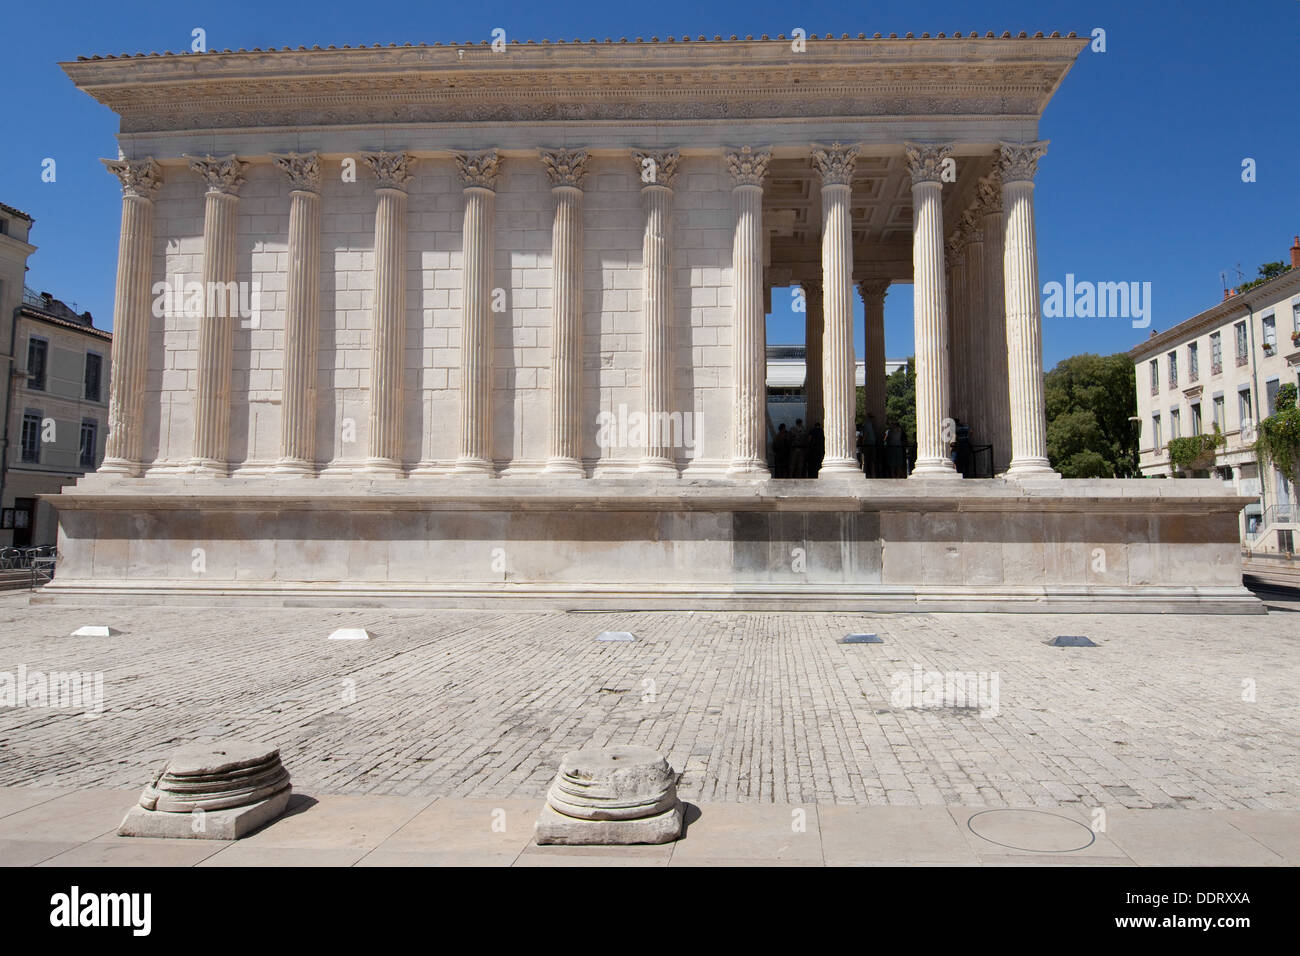 Maison Carree in Nimes, France. Stock Photo